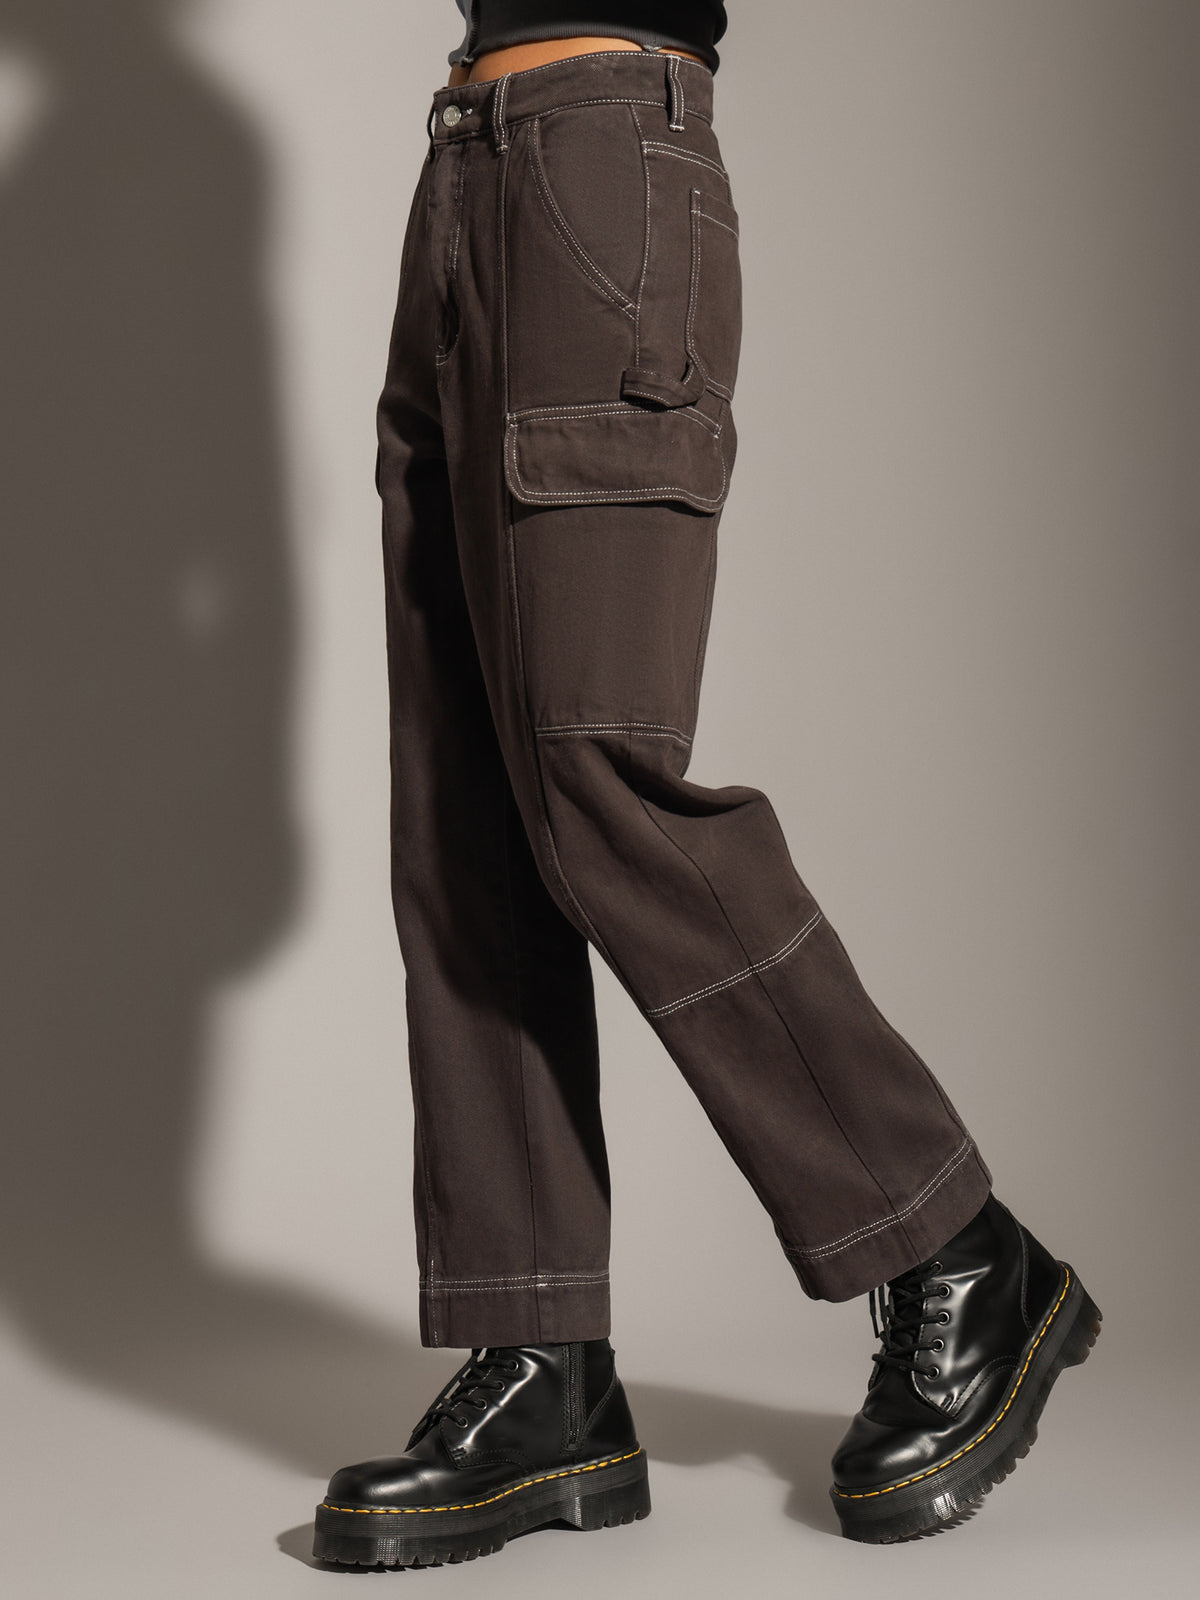 Ivy Cargo Pants in Washed Black